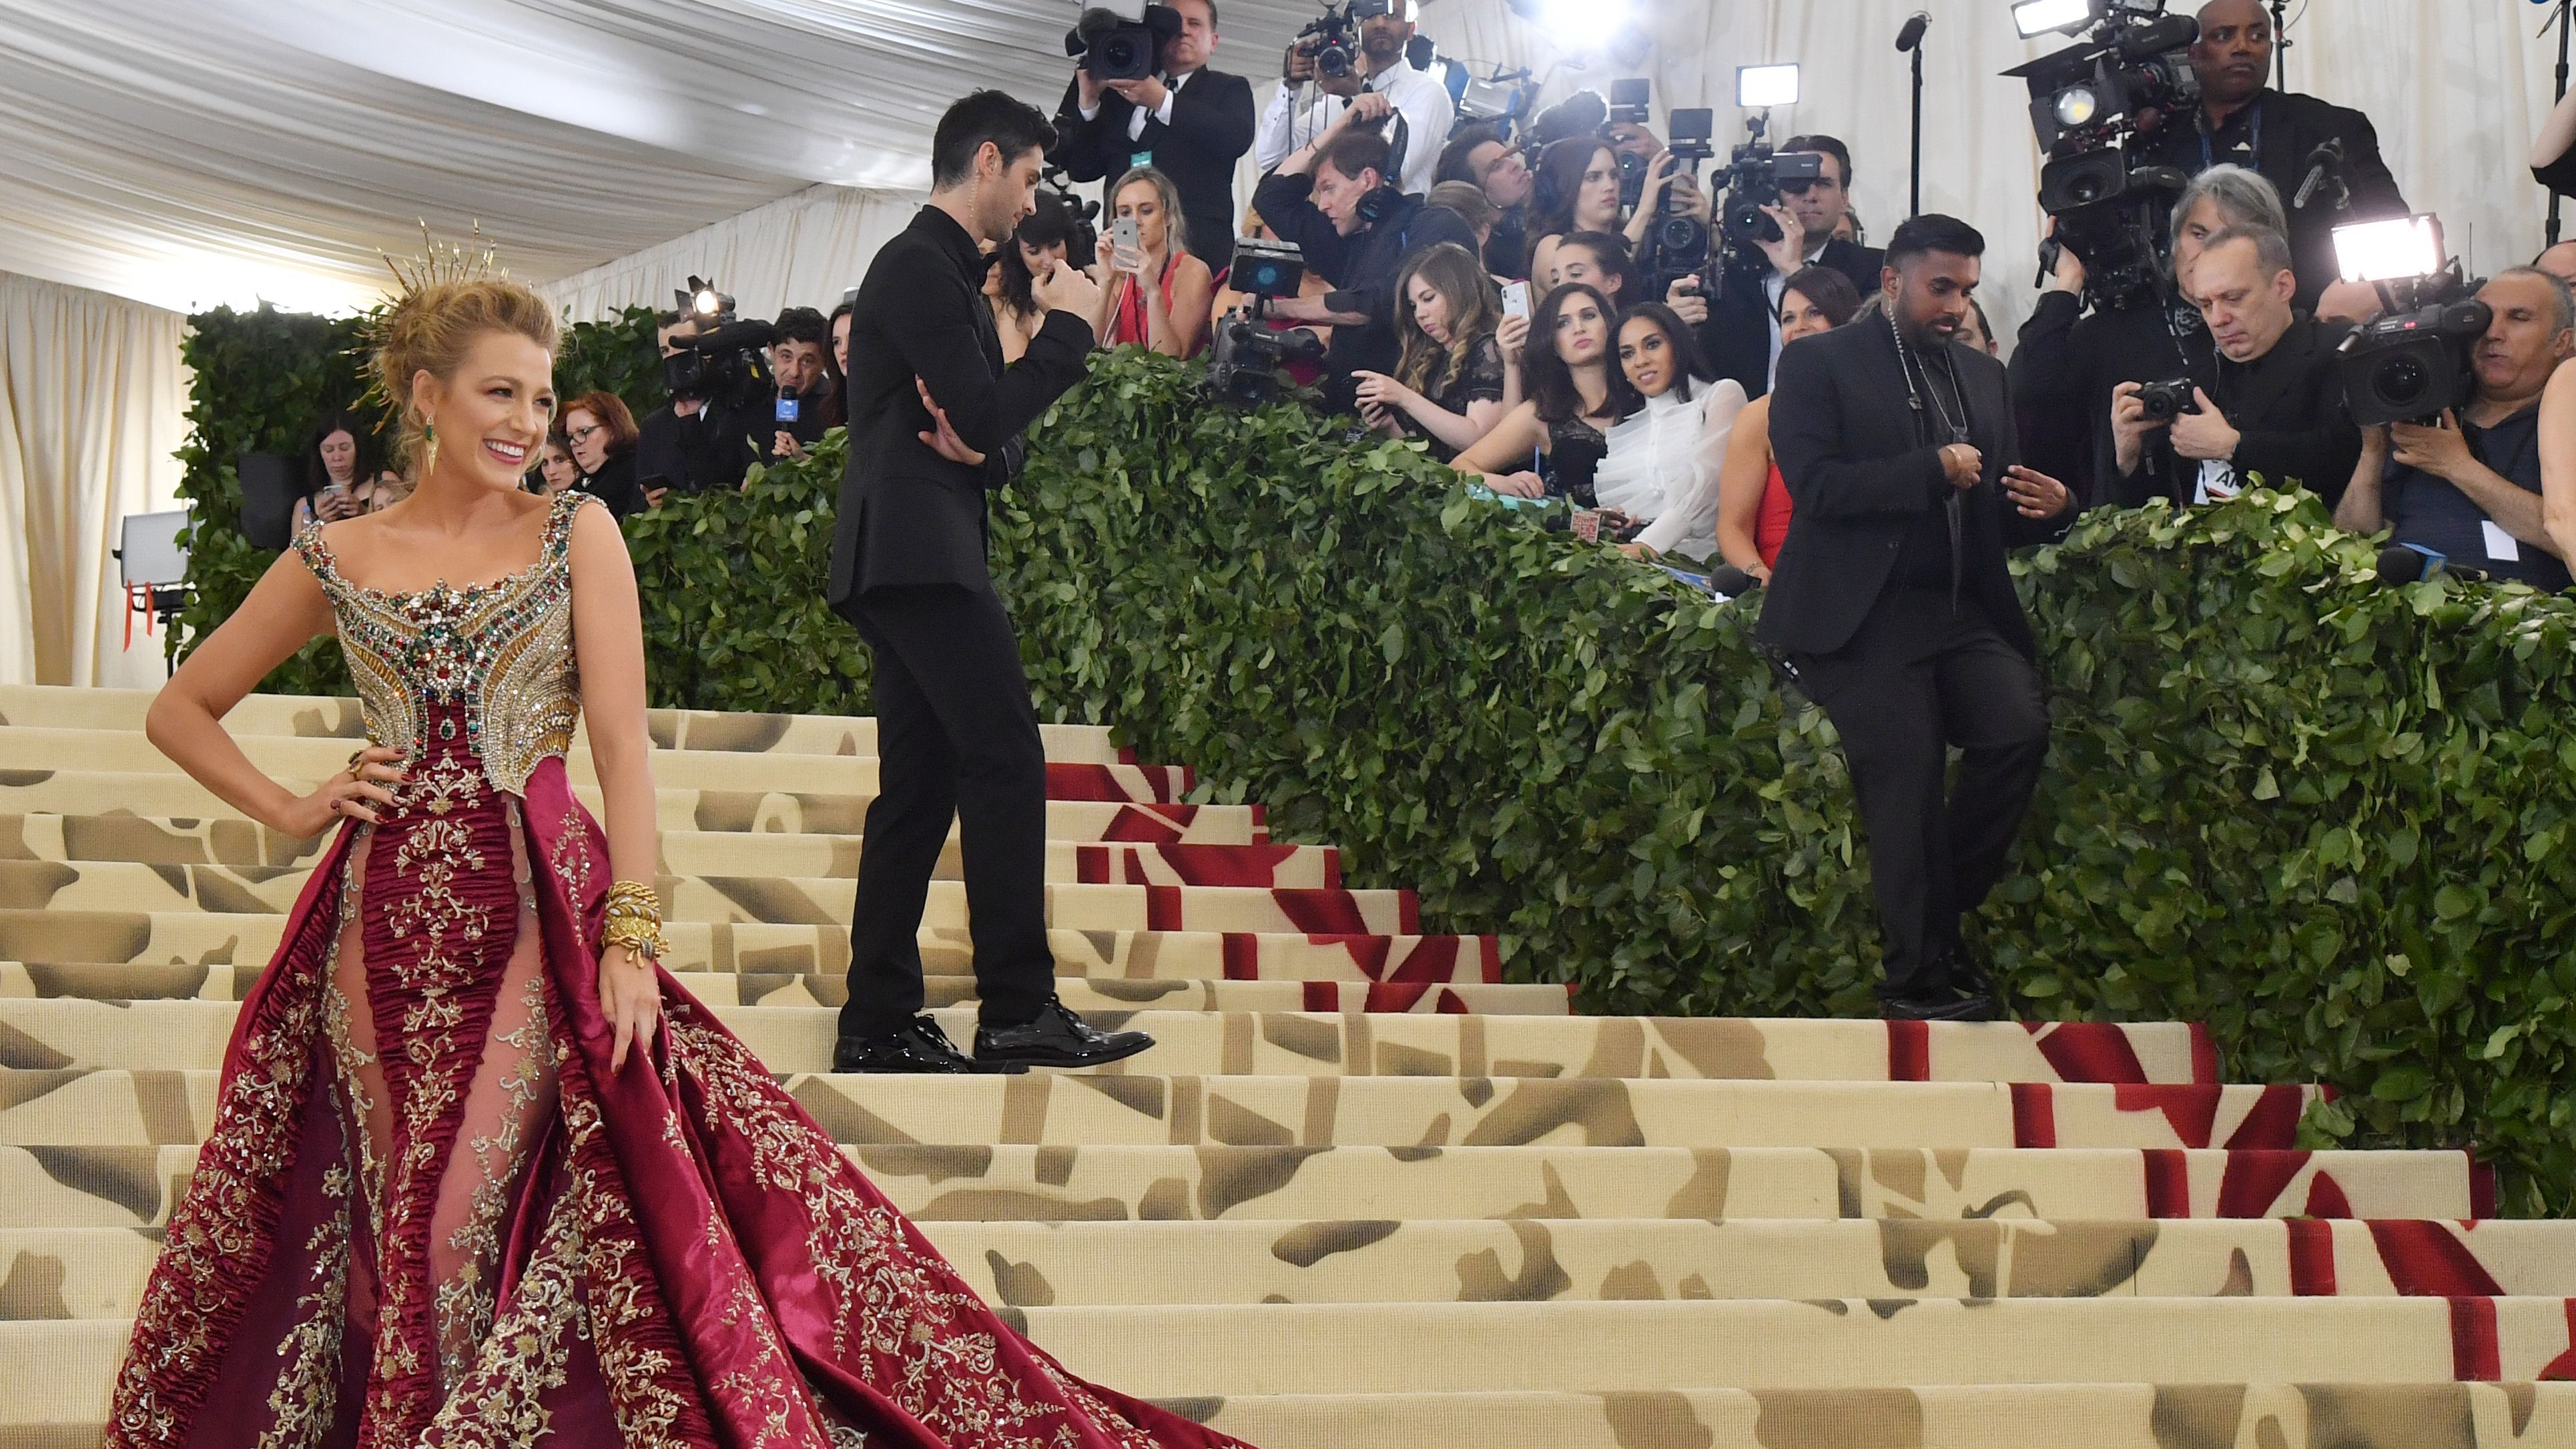 Blake Lively's Met Gala Red Carpet Looks Through the Years: Photos